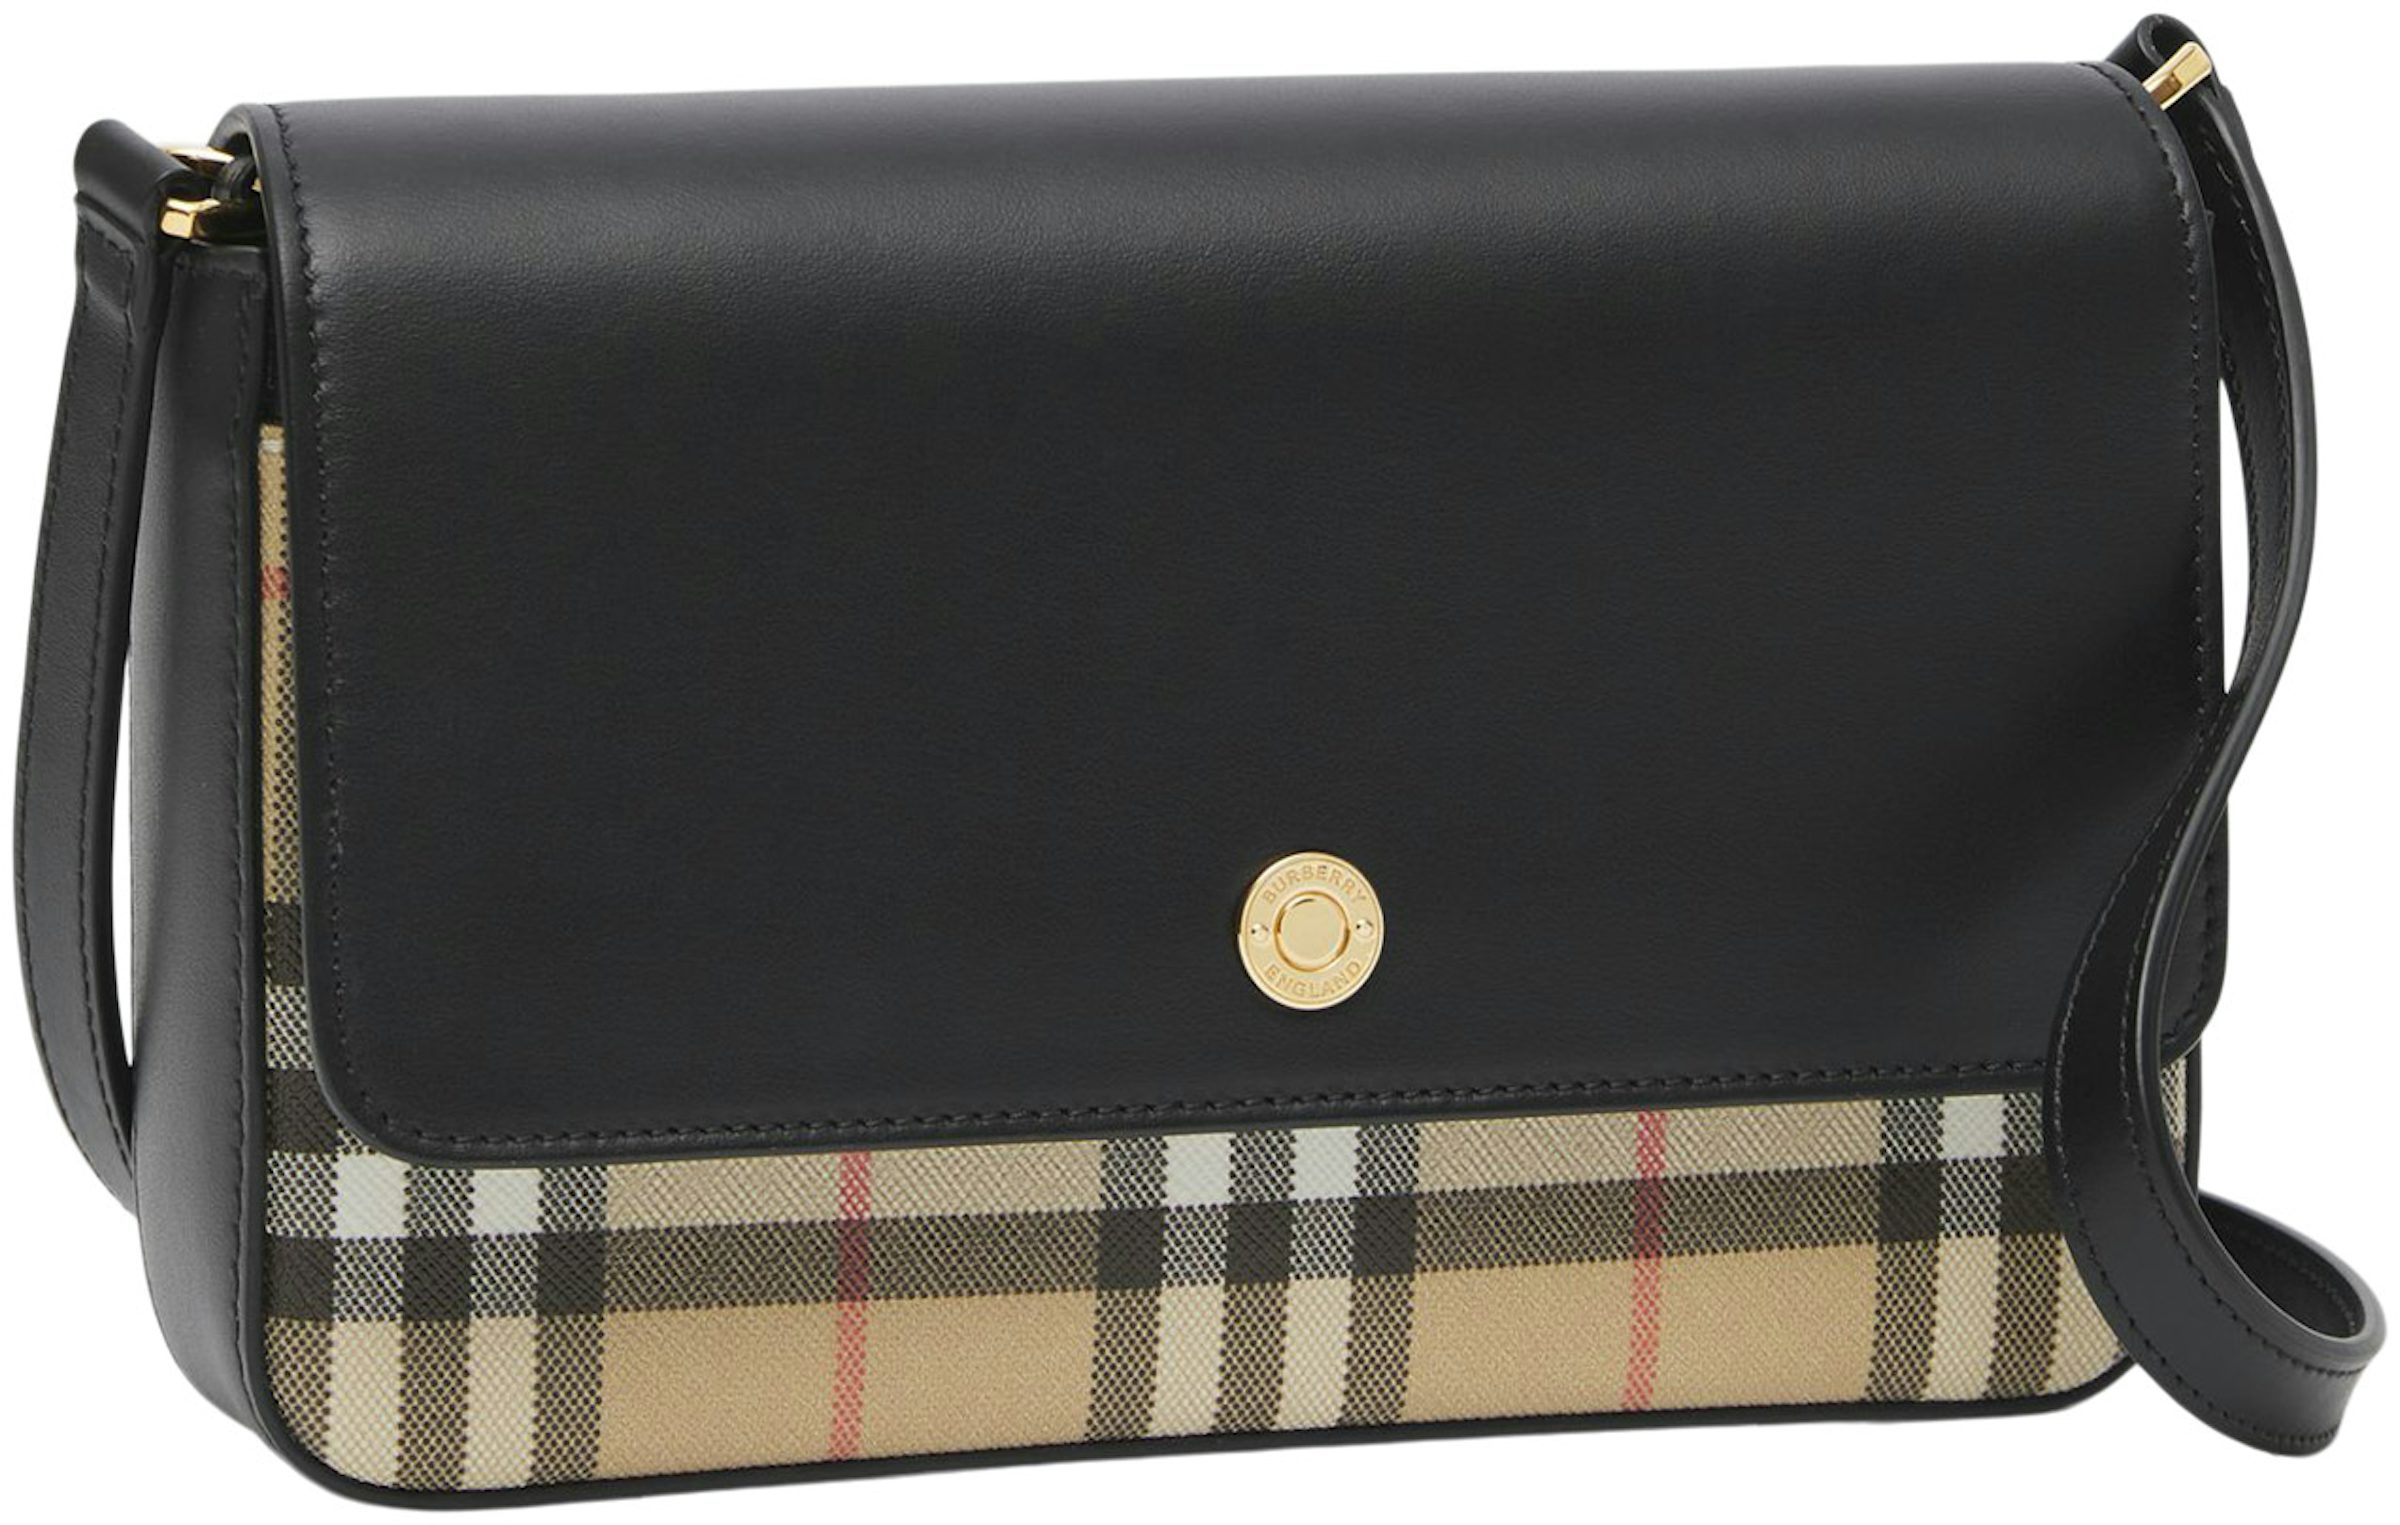 Burberry Black/Green Checkered Canvas and Leather Robin Crossbody Bag  Burberry